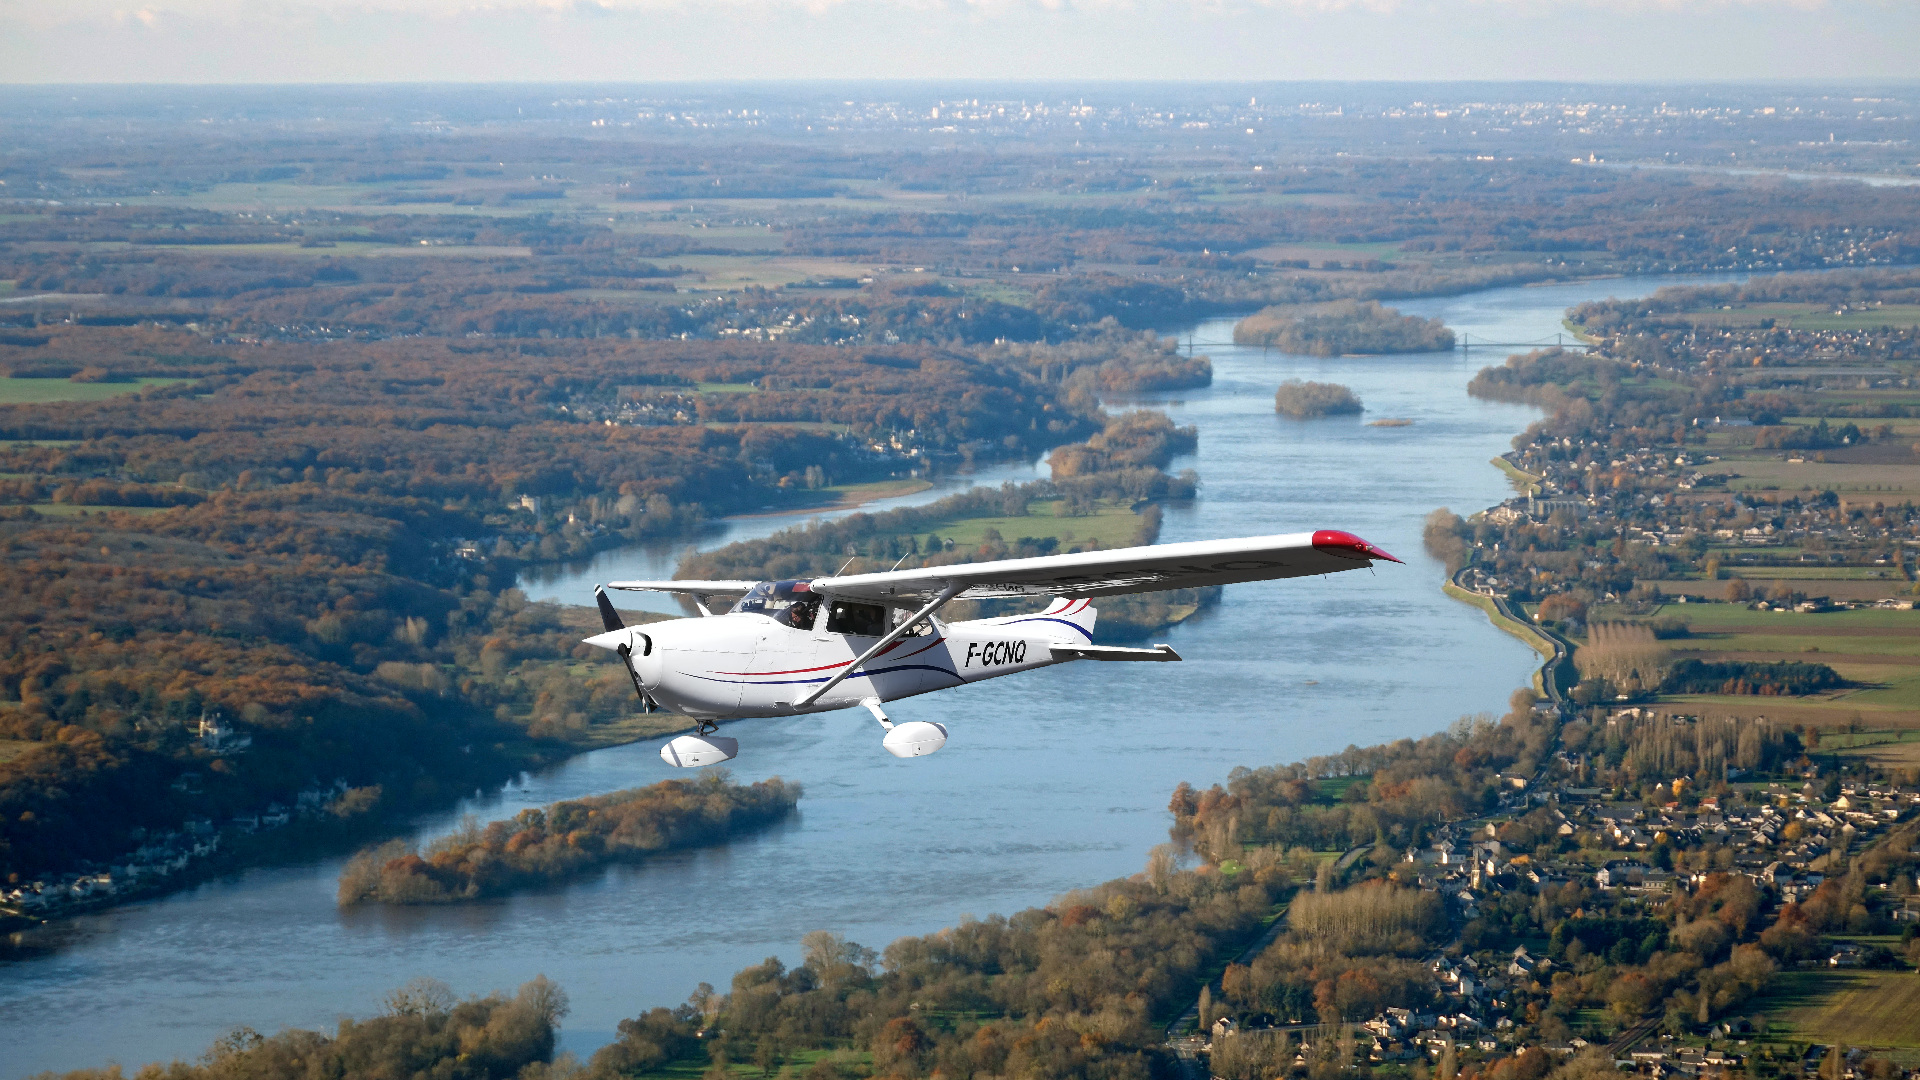 Saumur Air Club Cessna 172 overflying the Loire river